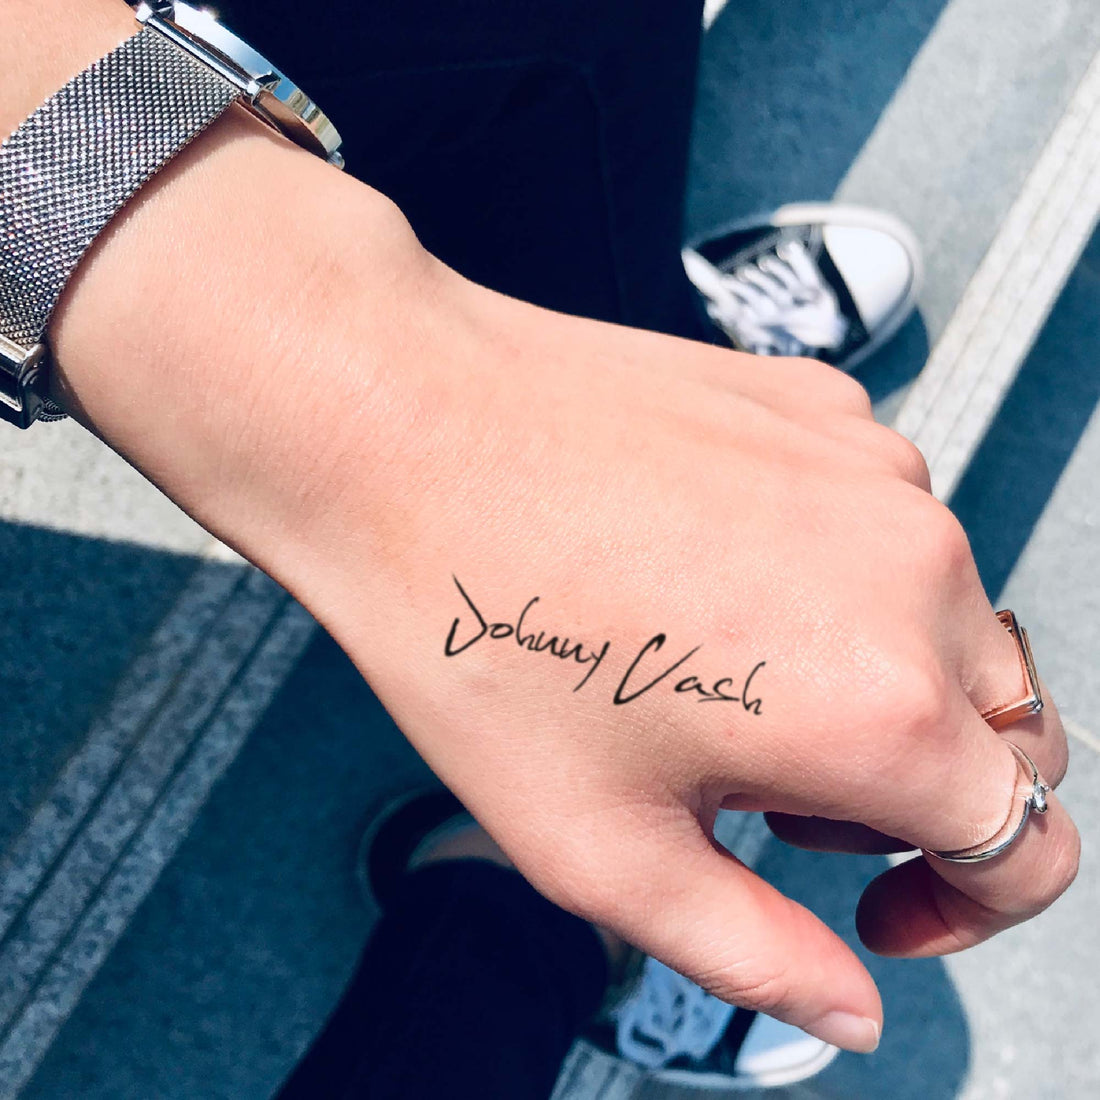 Johnny Cash custom temporary tattoo sticker design idea inspiration meanings removal arm wrist hand words font name signature calligraphy lyrics tour concert outfits merch accessory gift souvenir costumes wear dress up code